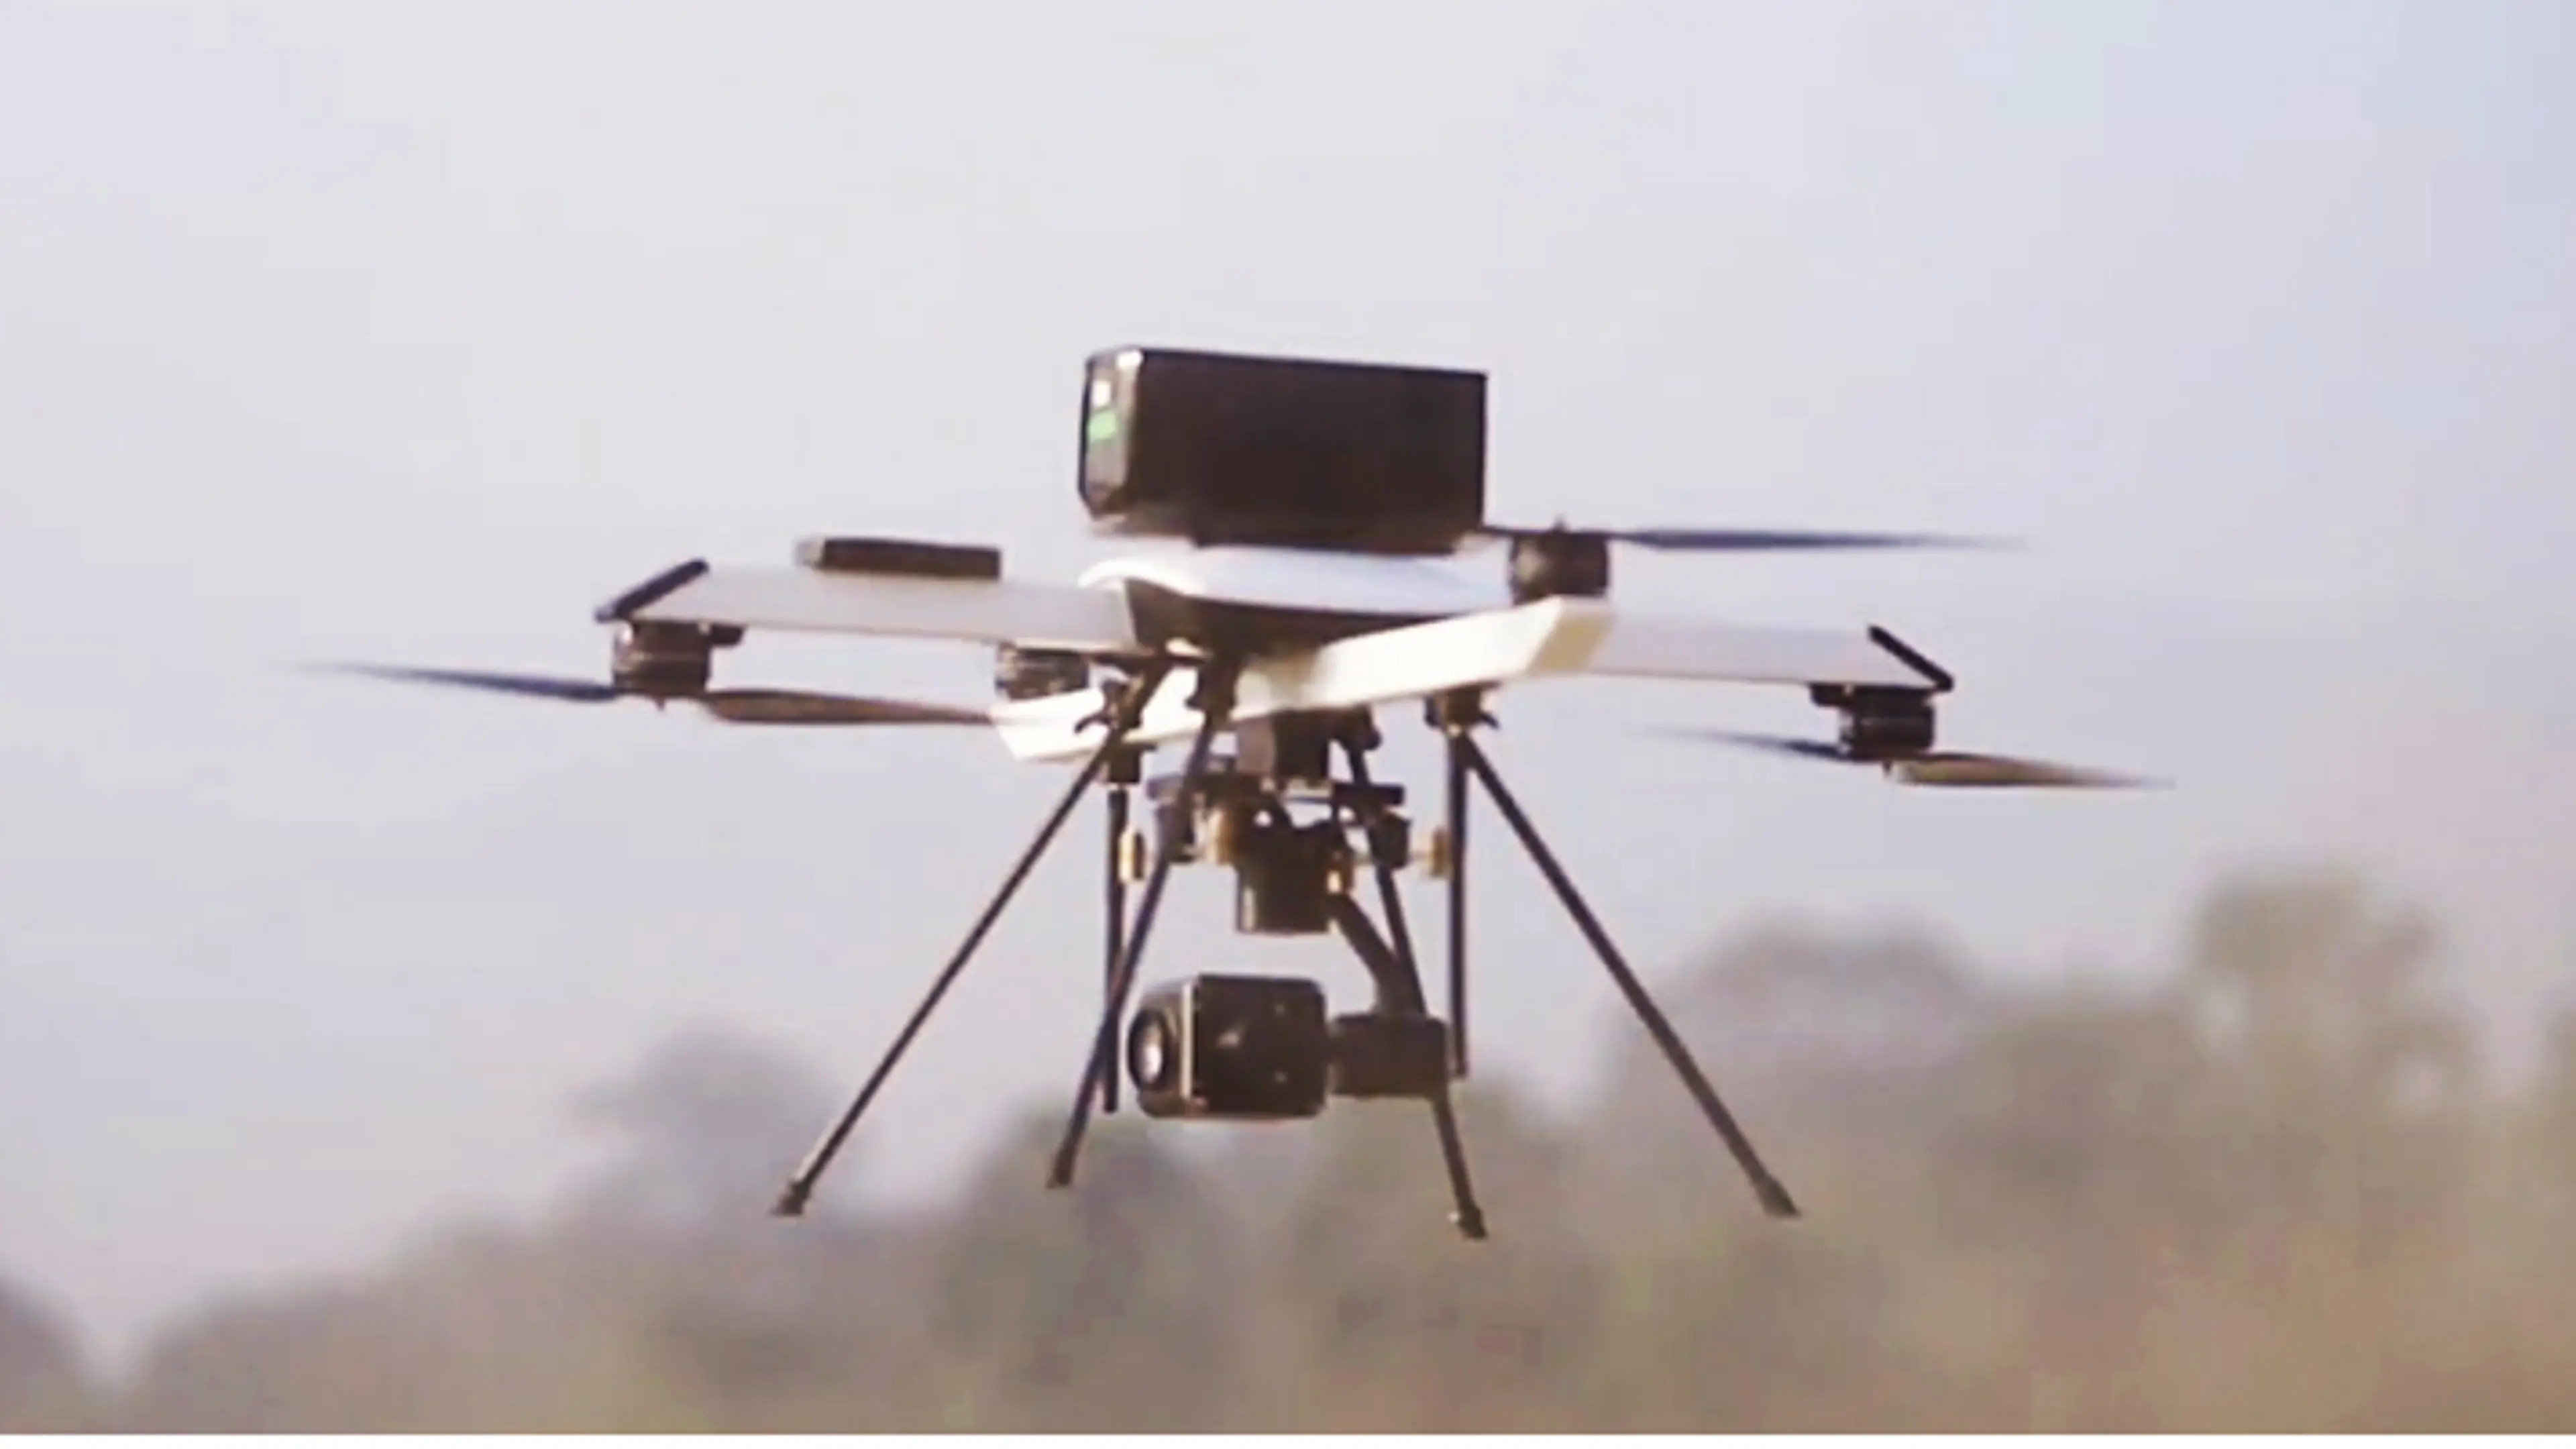 Gujarat government expects new drone policy to create 25,000 jobs